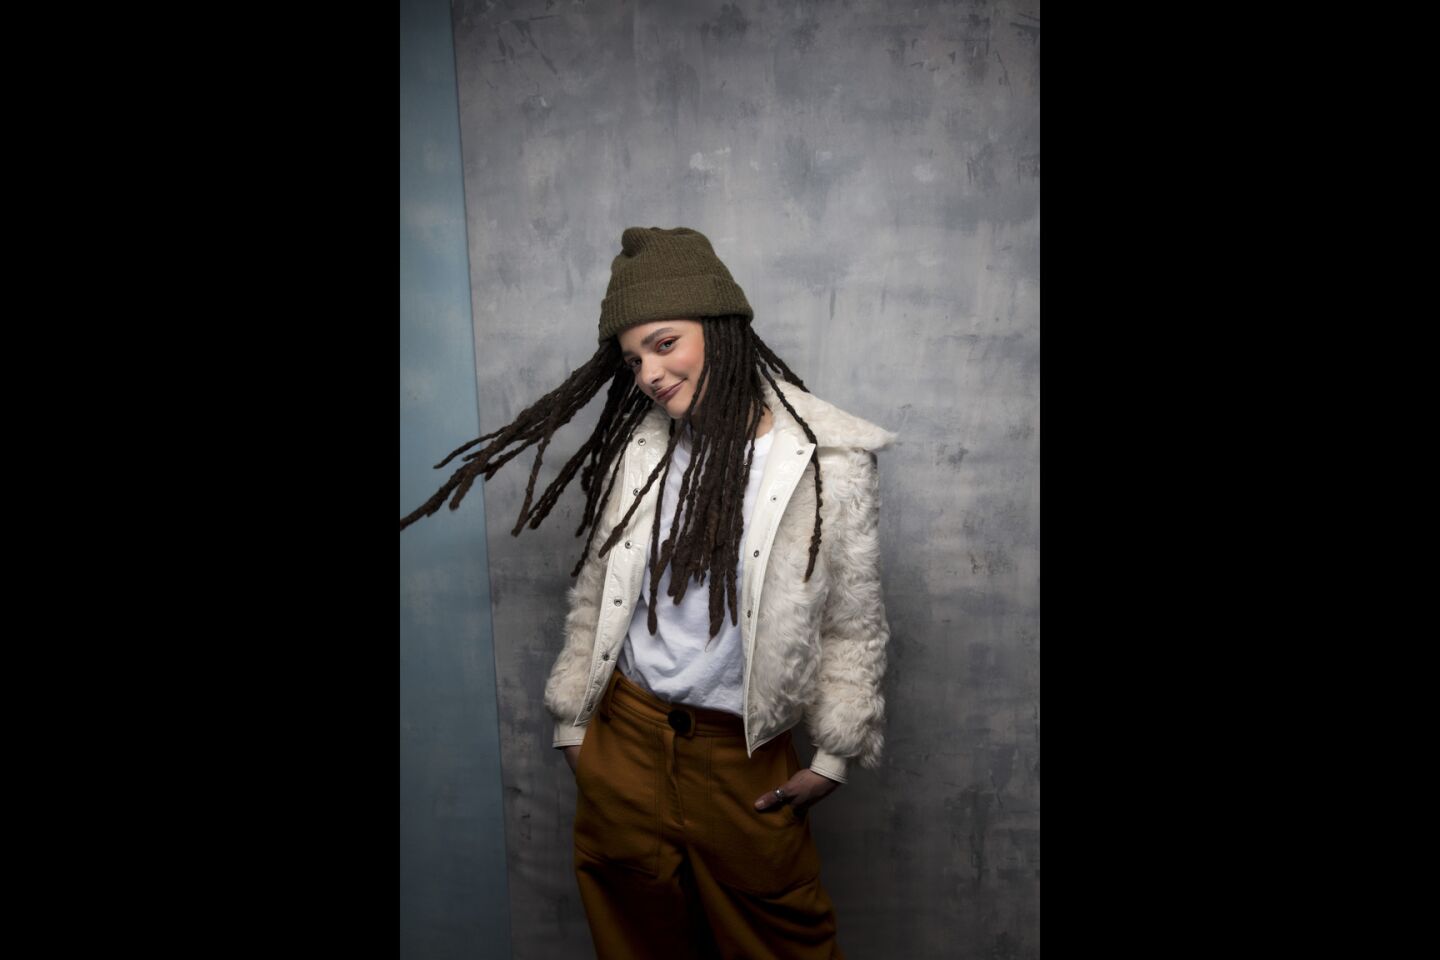 Actress Sasha Lane, from the film "The Miseducation of Cameron Post," photographed in the L.A. Times Studio at Chase Sapphire on Main, during the Sundance Film Festival in Park City, Utah, Jan. 21, 2018.